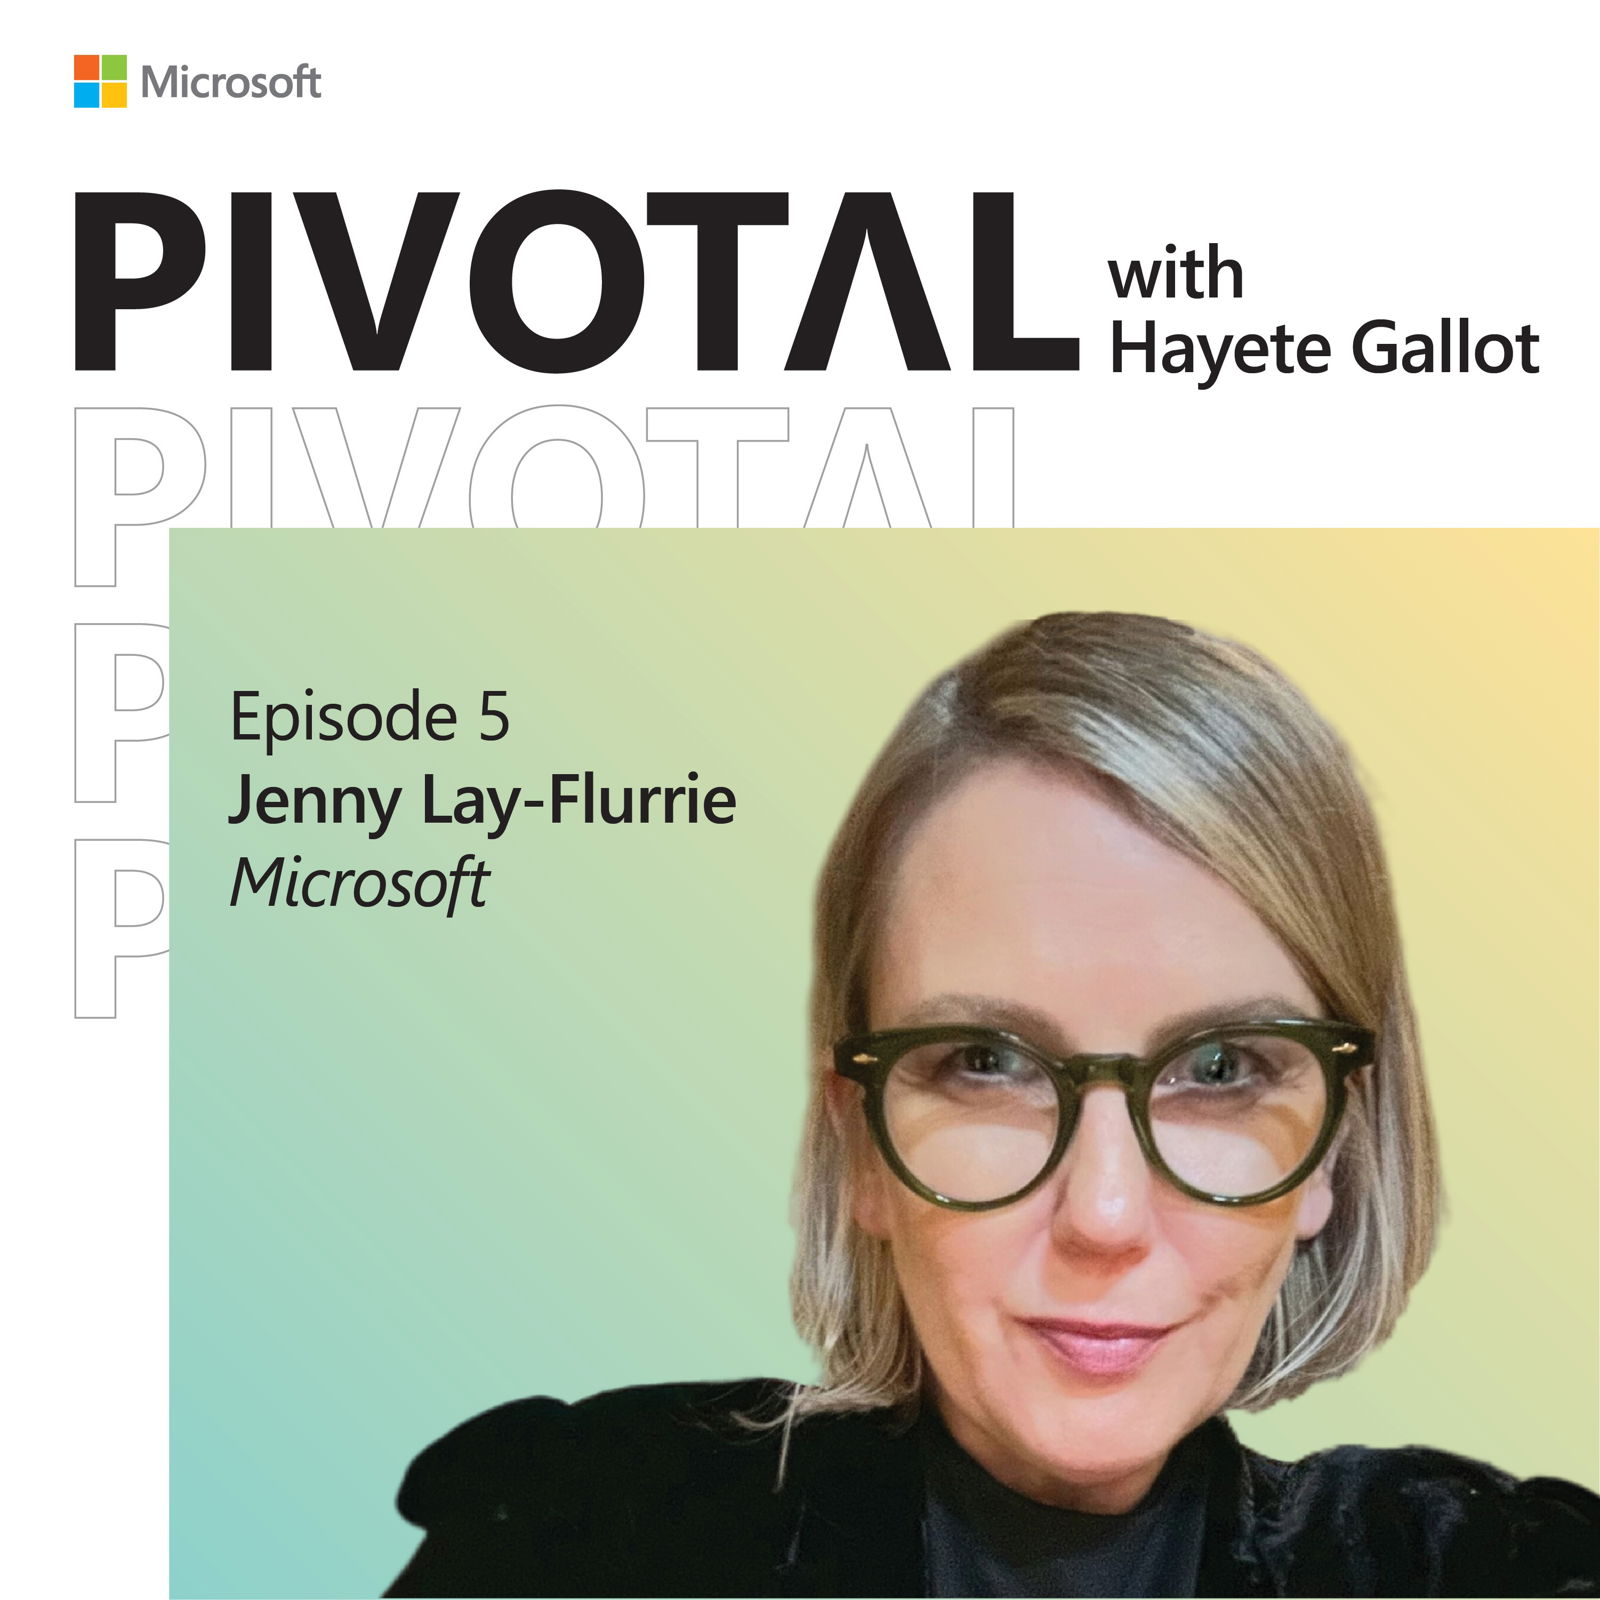 The doors we open when accessibility leads, with Microsoft's Jenny Lay-Flurrie